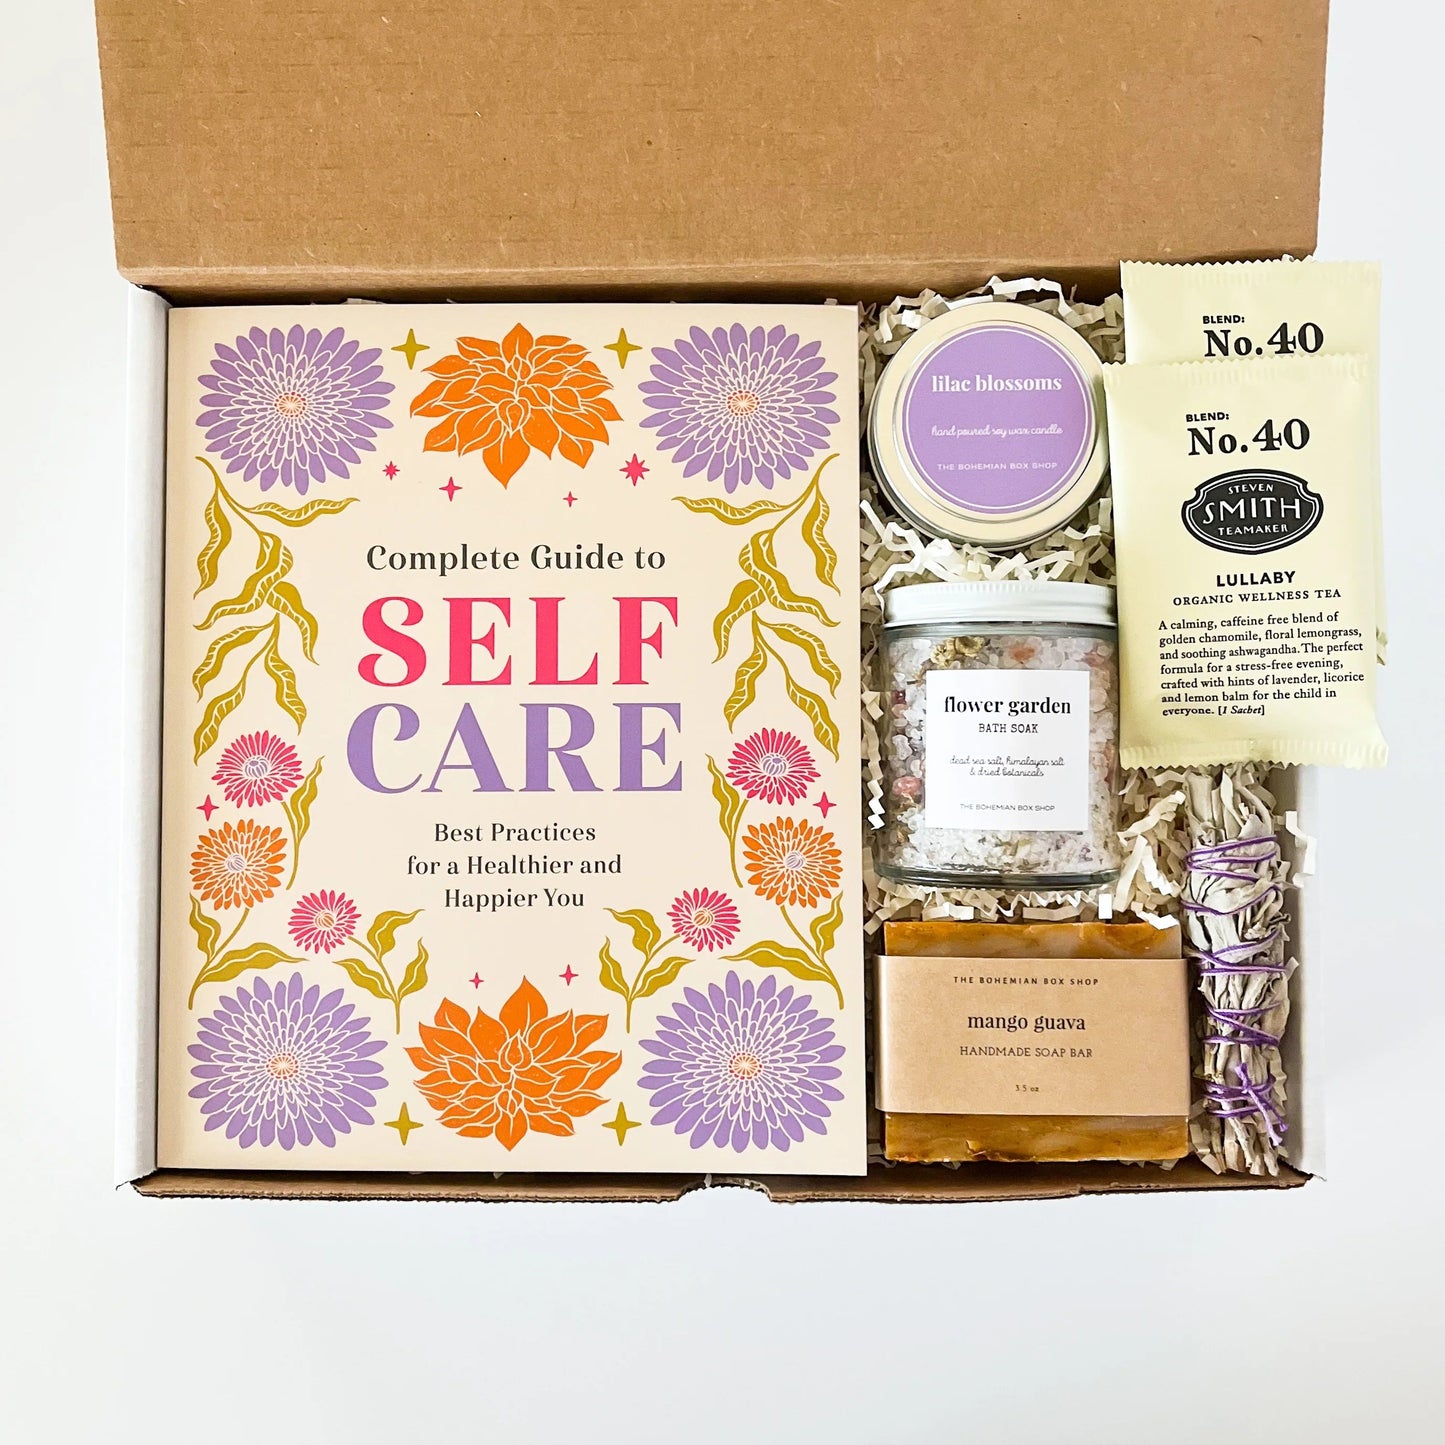 Self-care gift set for women. Includes a complete guy to self-care book, lilac soy candle, flower garden bath soak mango guava soap, tea packets, and mini sage bundle. 